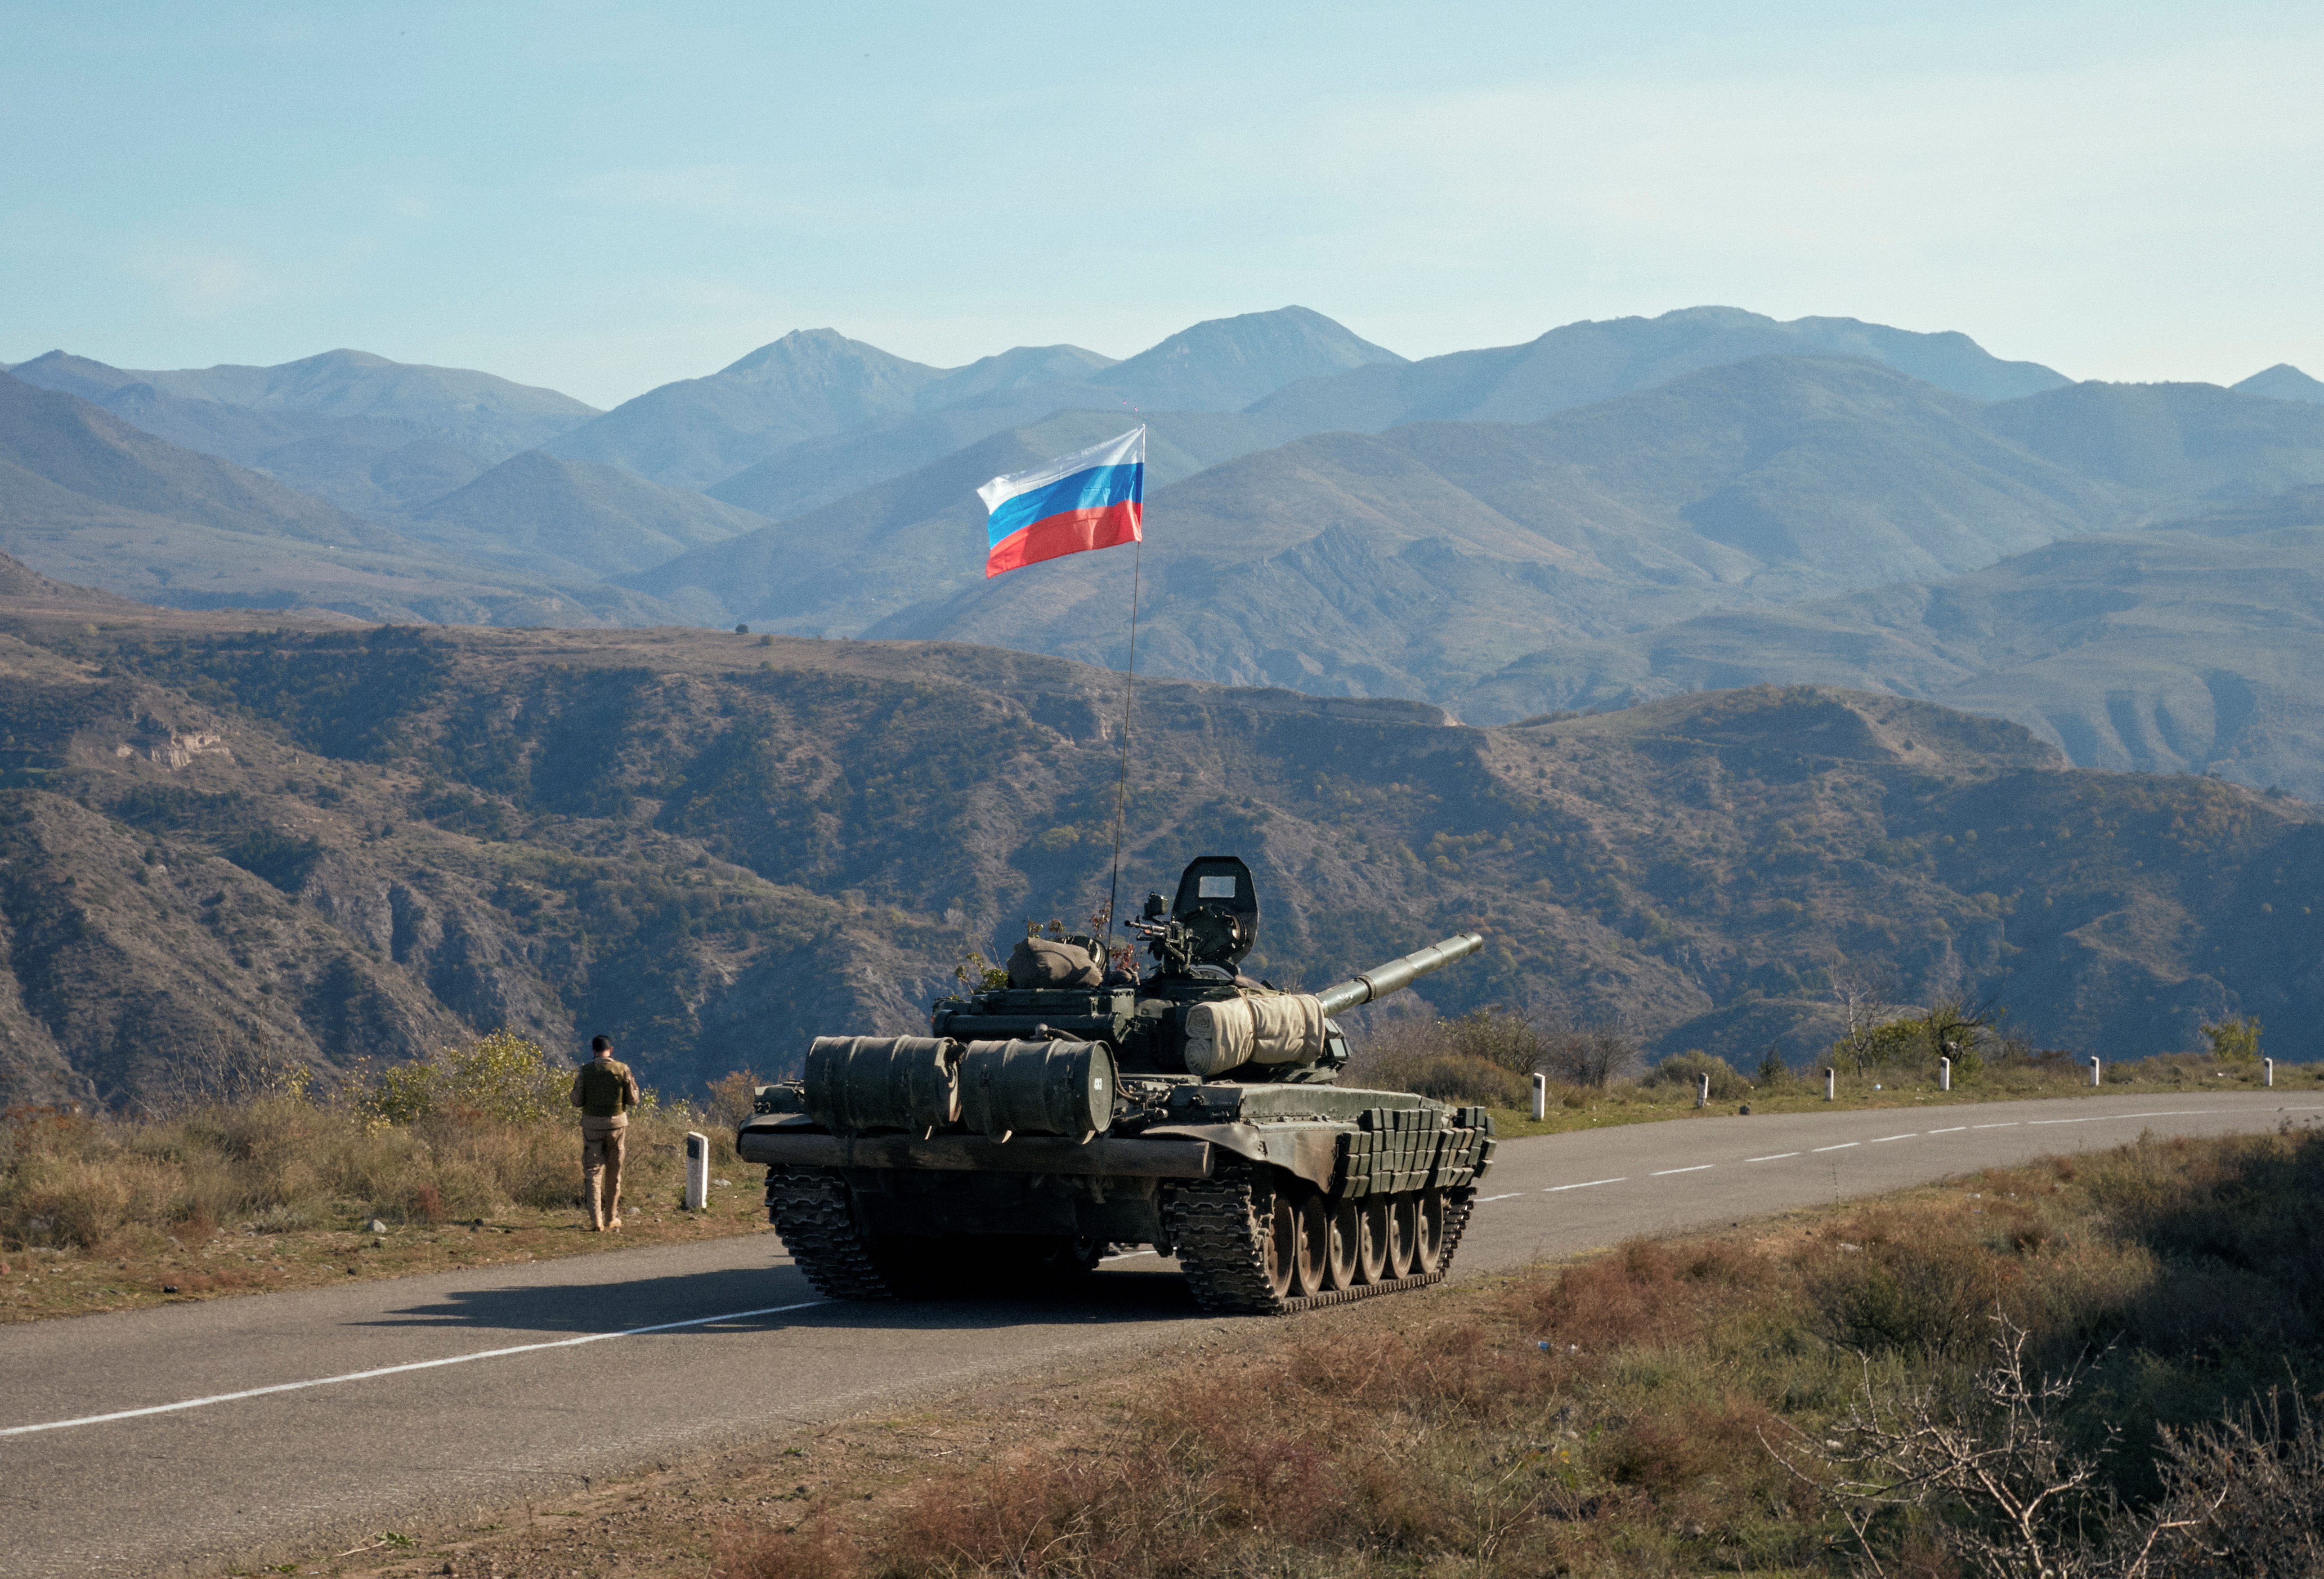 A service member of the Russian peacekeeping troops walks near a tank in Nagorno-Karabakh